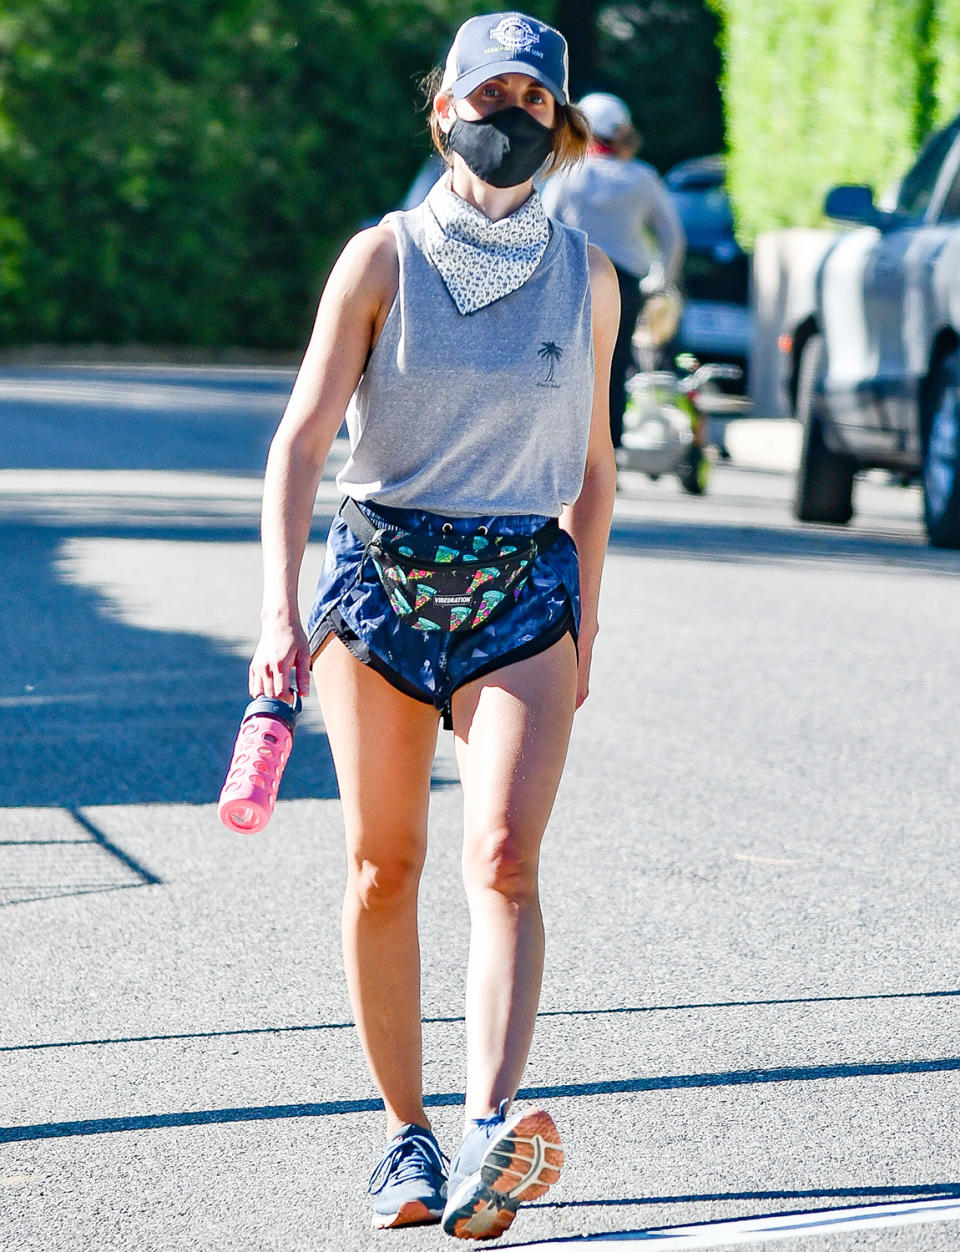 <p>Alison Brie changes into her running gear to break a sweat on Tuesday in sunny L.A.</p>